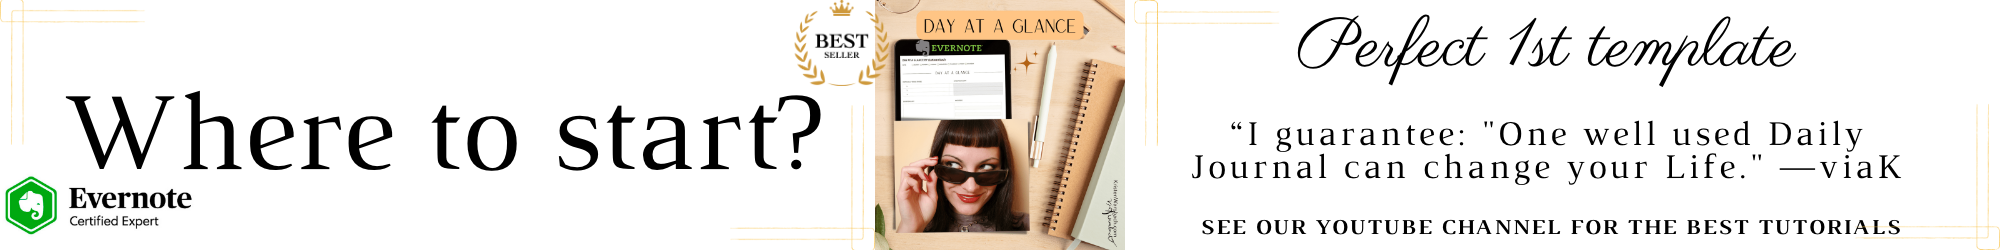 Where to start with Evernote? Perfect 1st template, a Day at a GLANCE daily planner